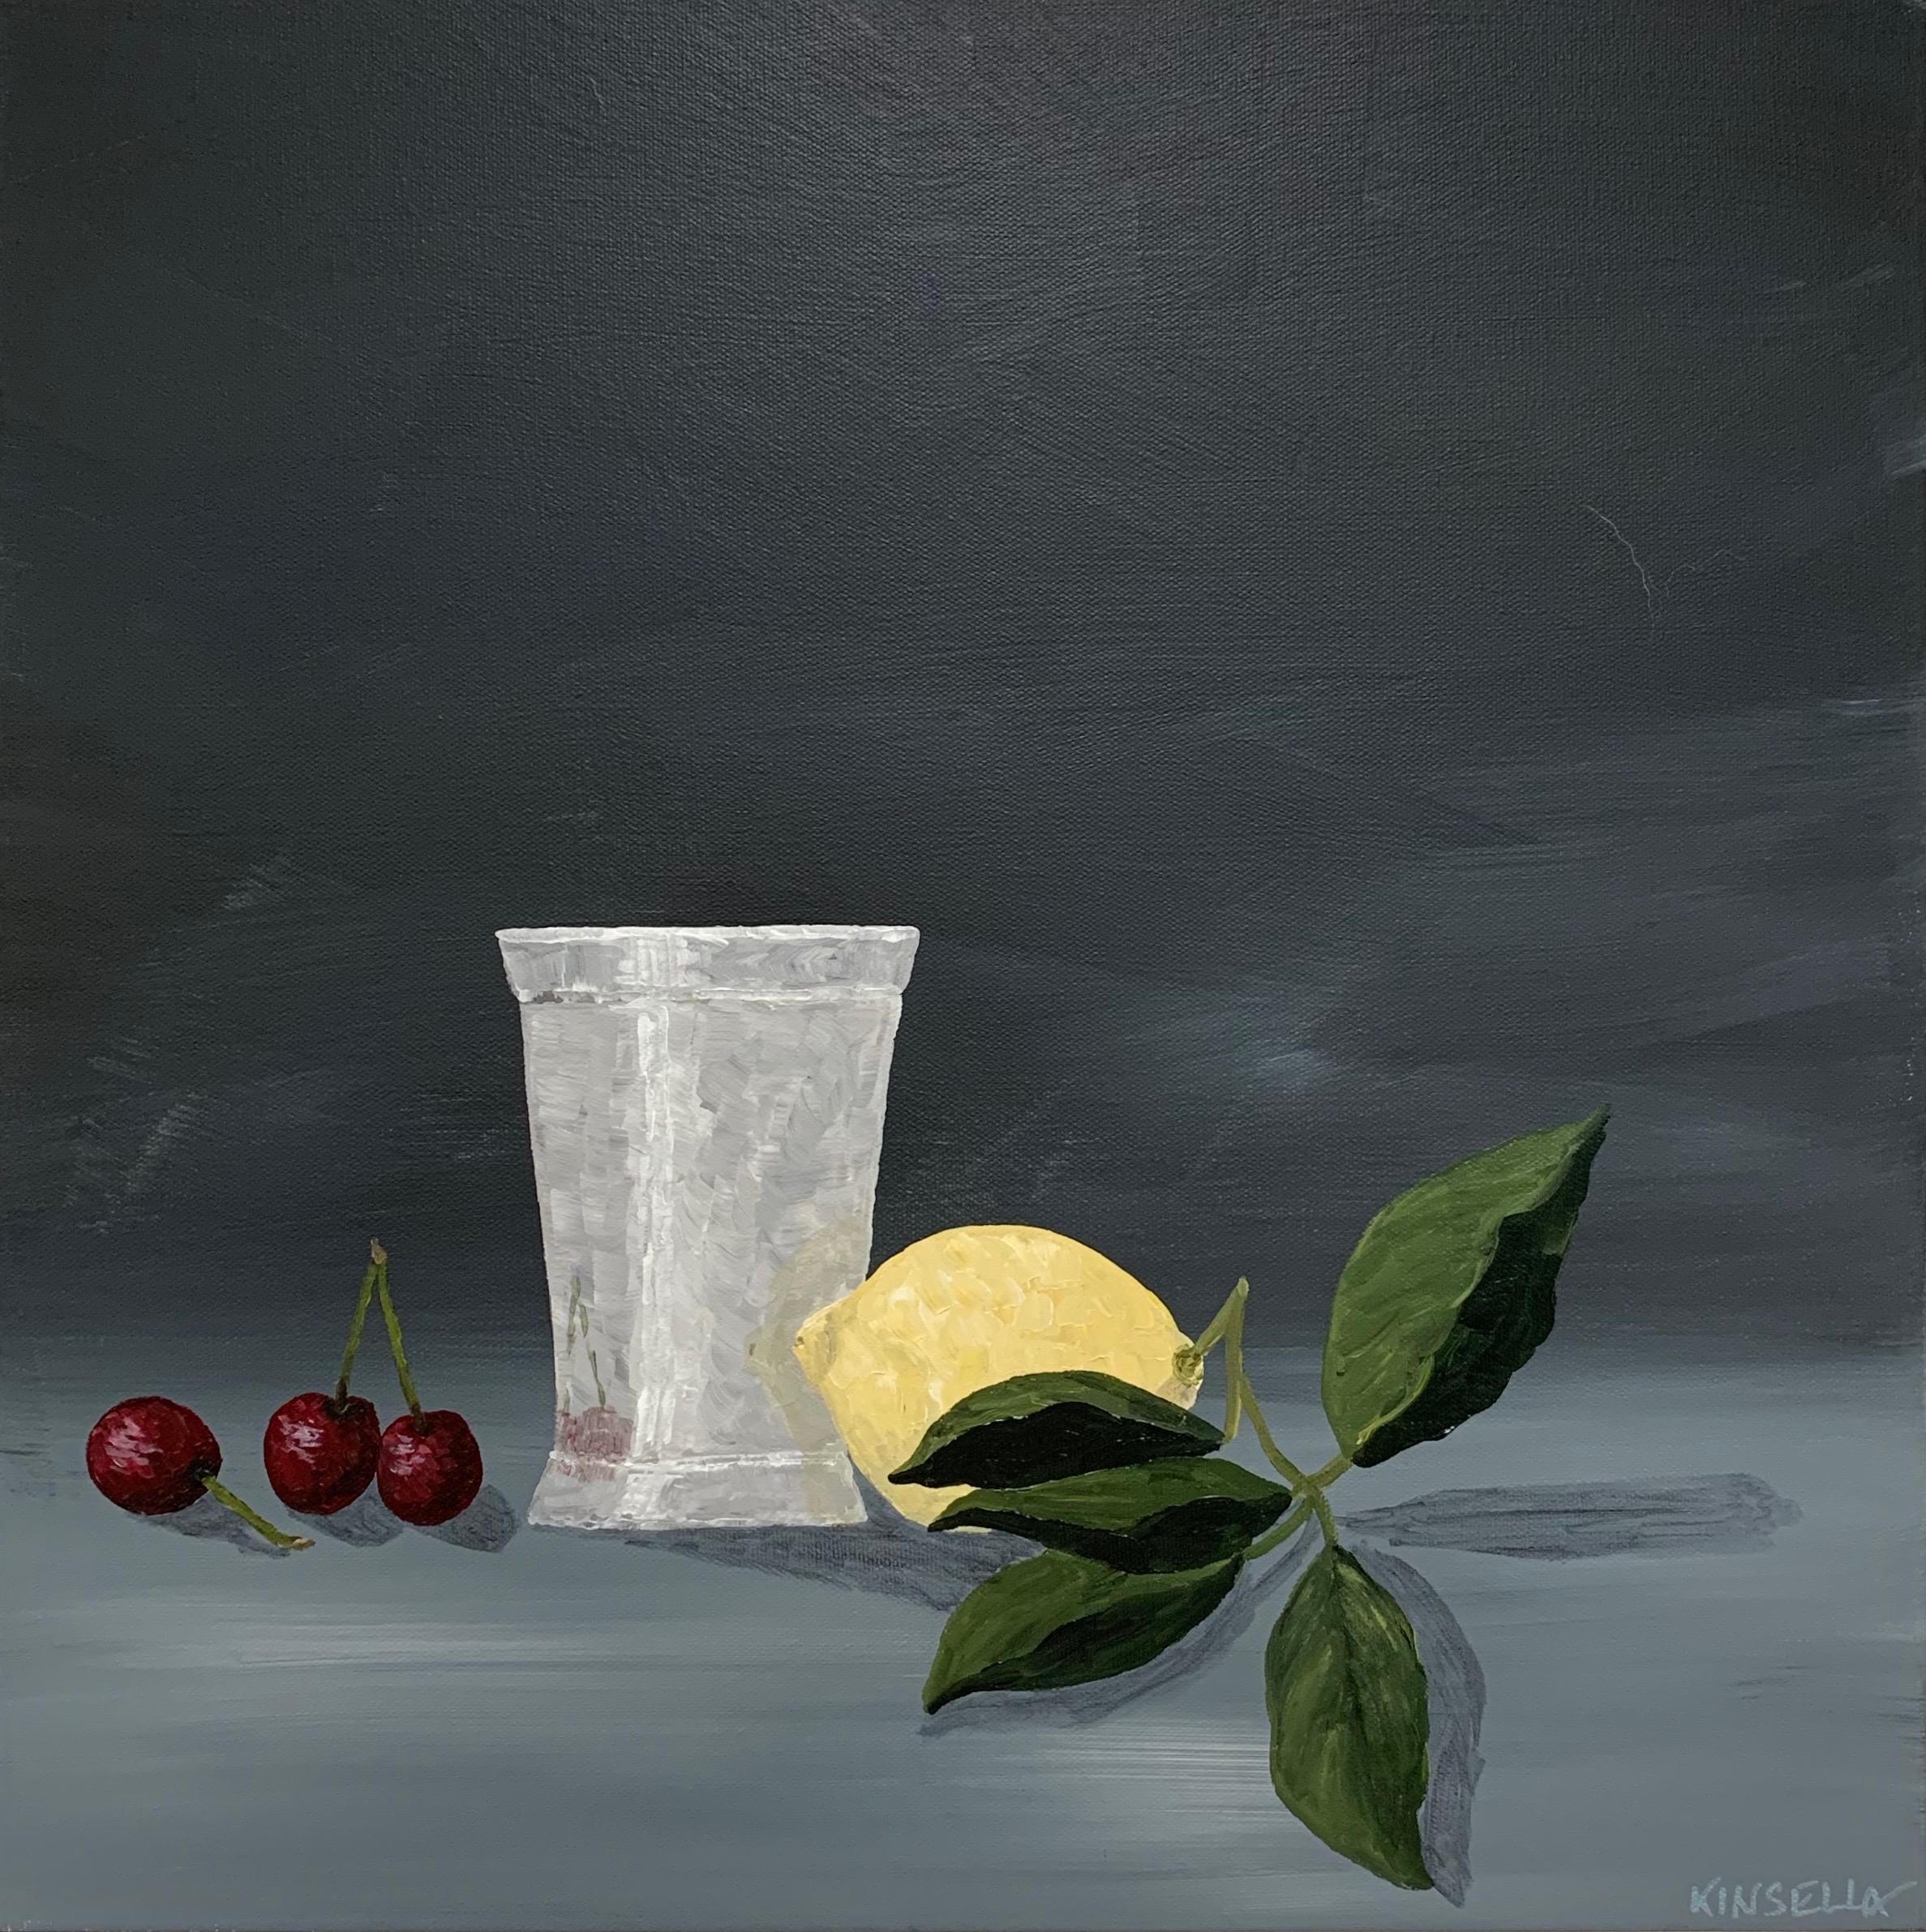 'Cherry Lemonade' is a small contemporary acrylic on canvas still-life painting created by American artist Susan Kinsella in 2019. Featuring a palette made of grey, white, green, red and yellow tones, the painting charms us with its minimalist